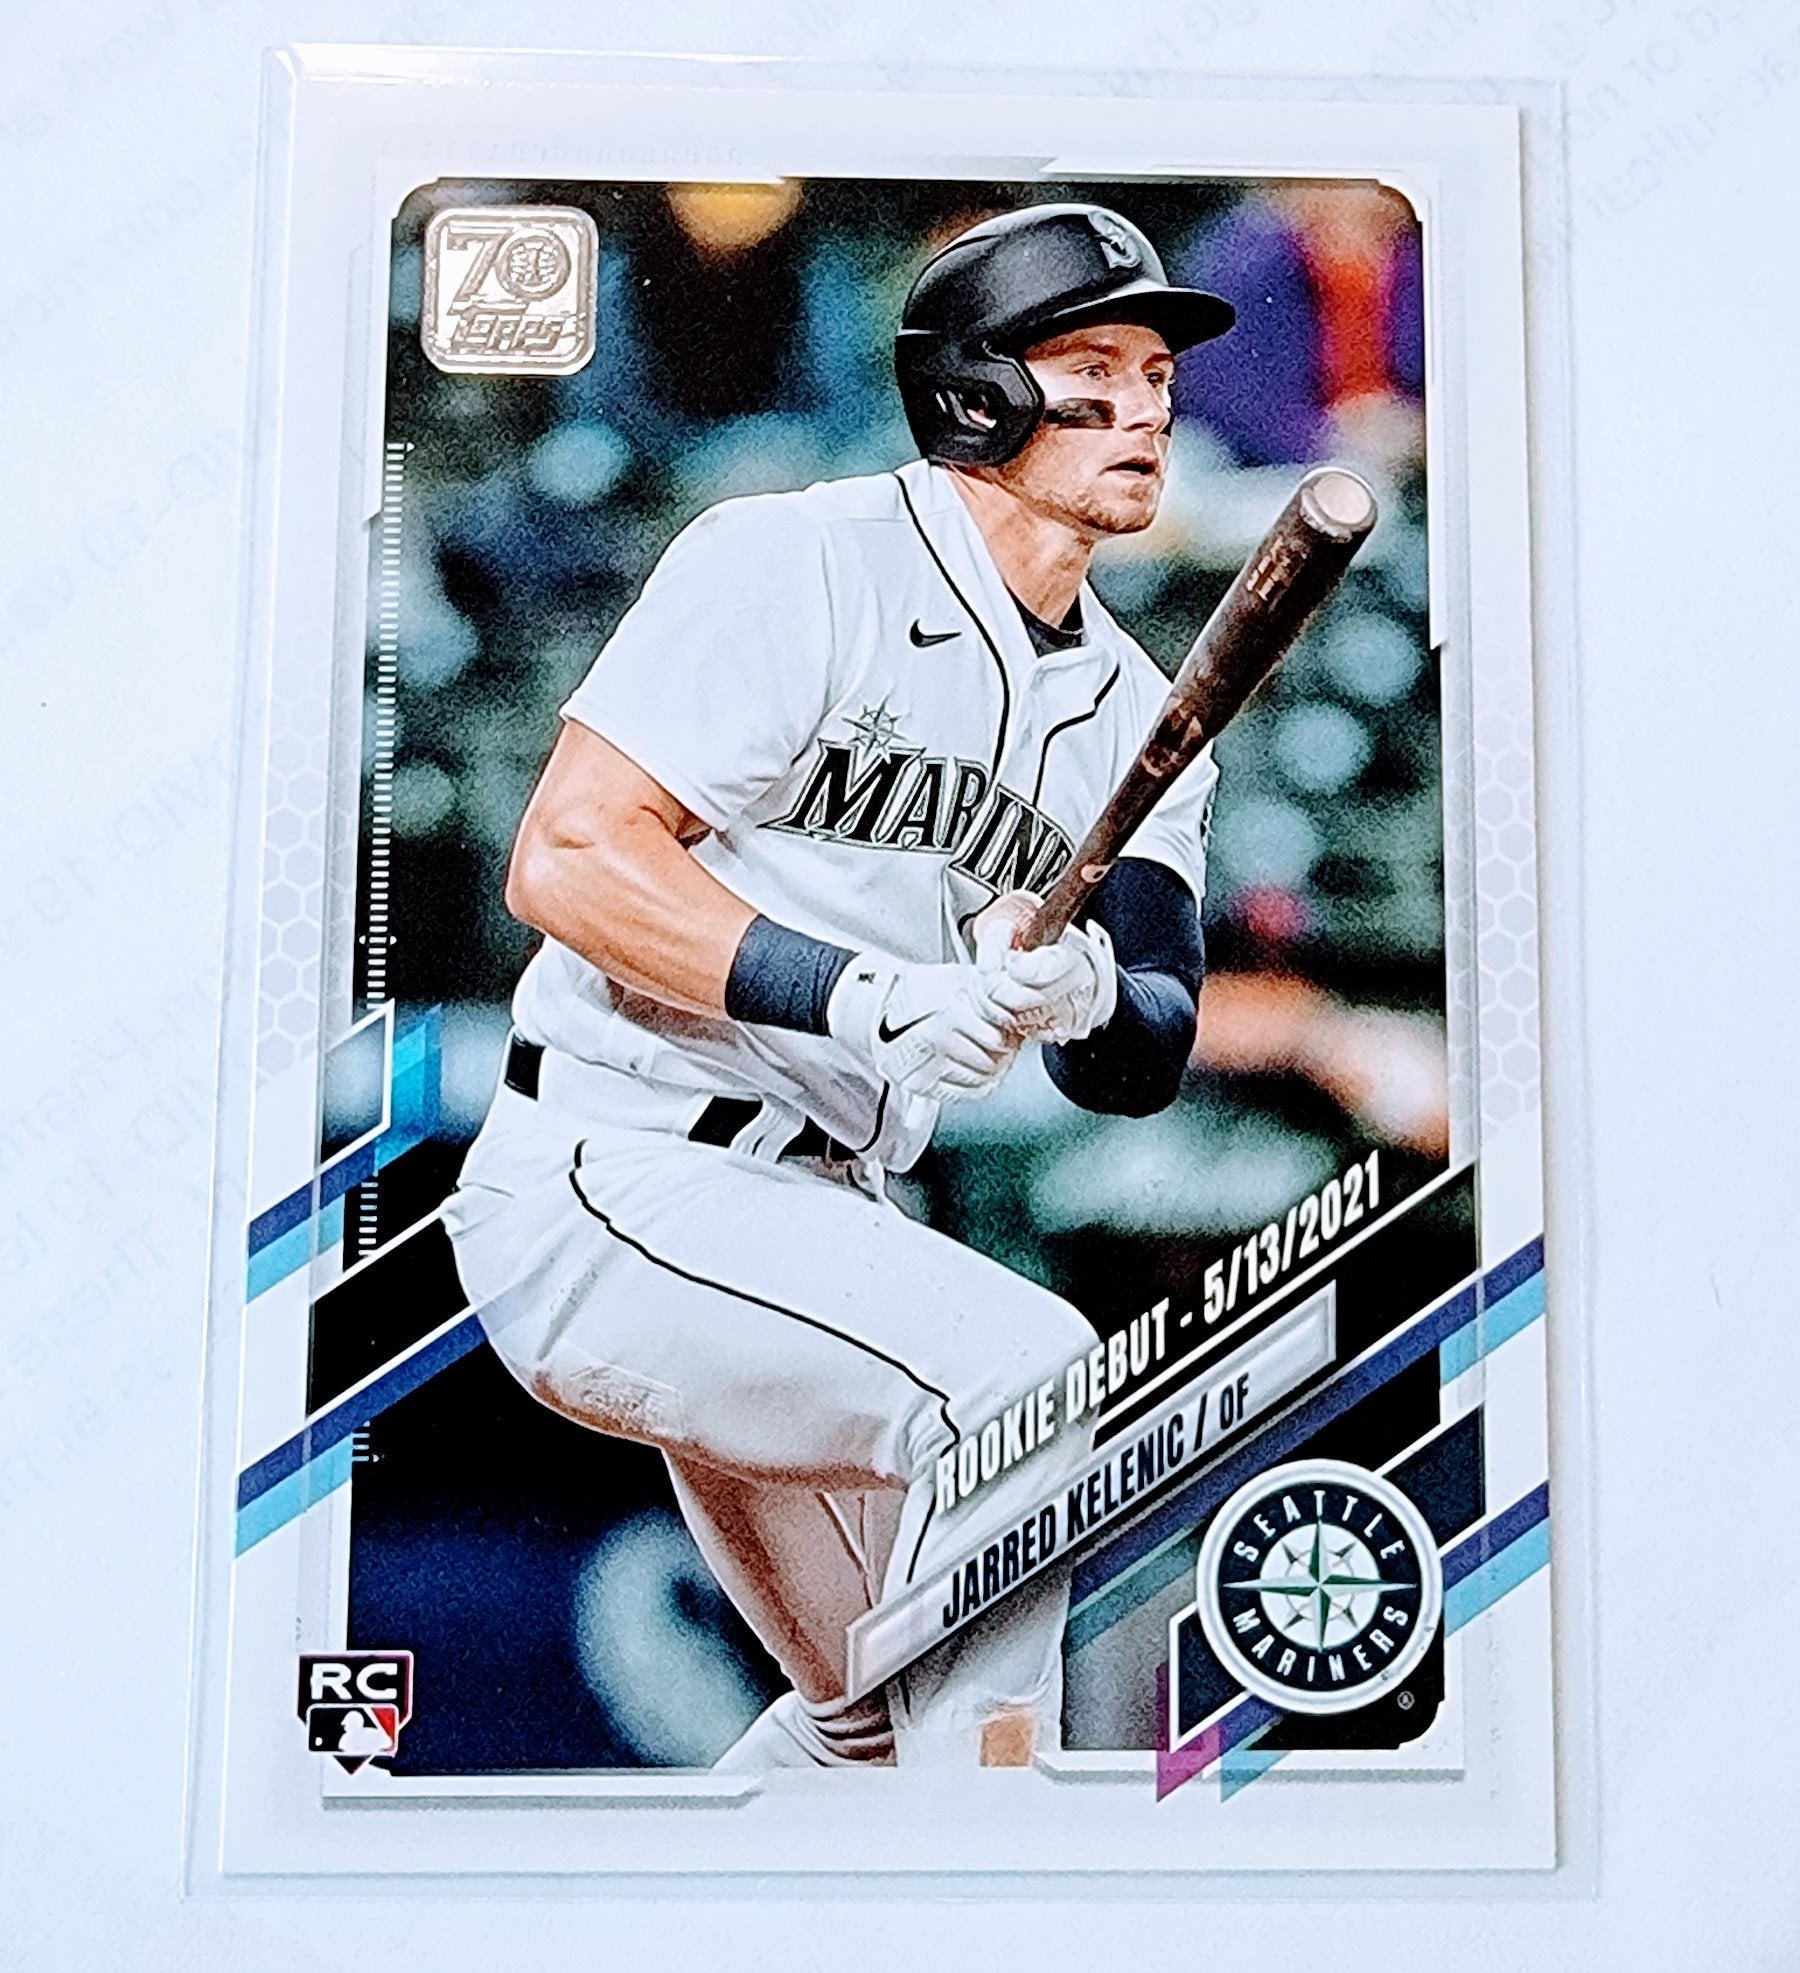 2021 Topps Update Jarred Kelenic Rookie Debut Baseball Trading Card SMCB1 simple Xclusive Collectibles   